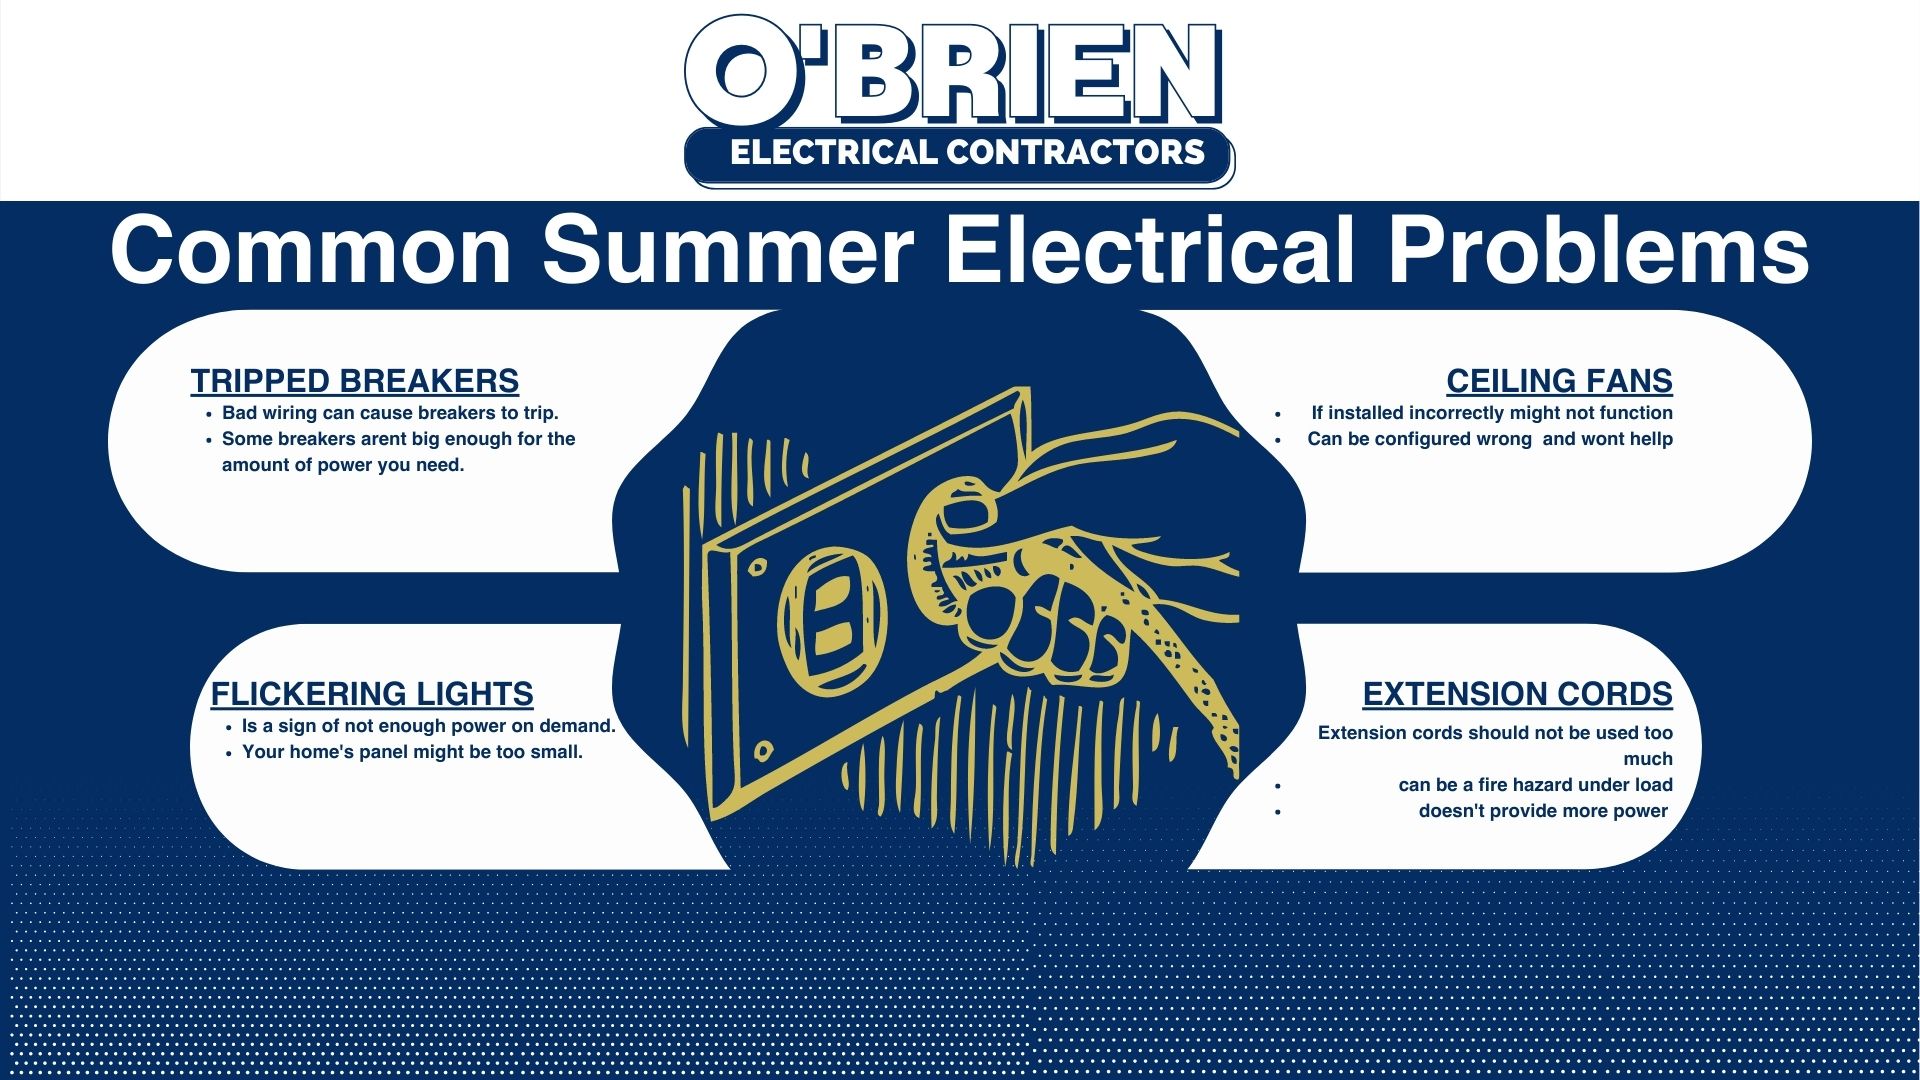 Common Summer Electrical Problems Obrien Electrical Contractors Denver Electrician Residential electrical services repair